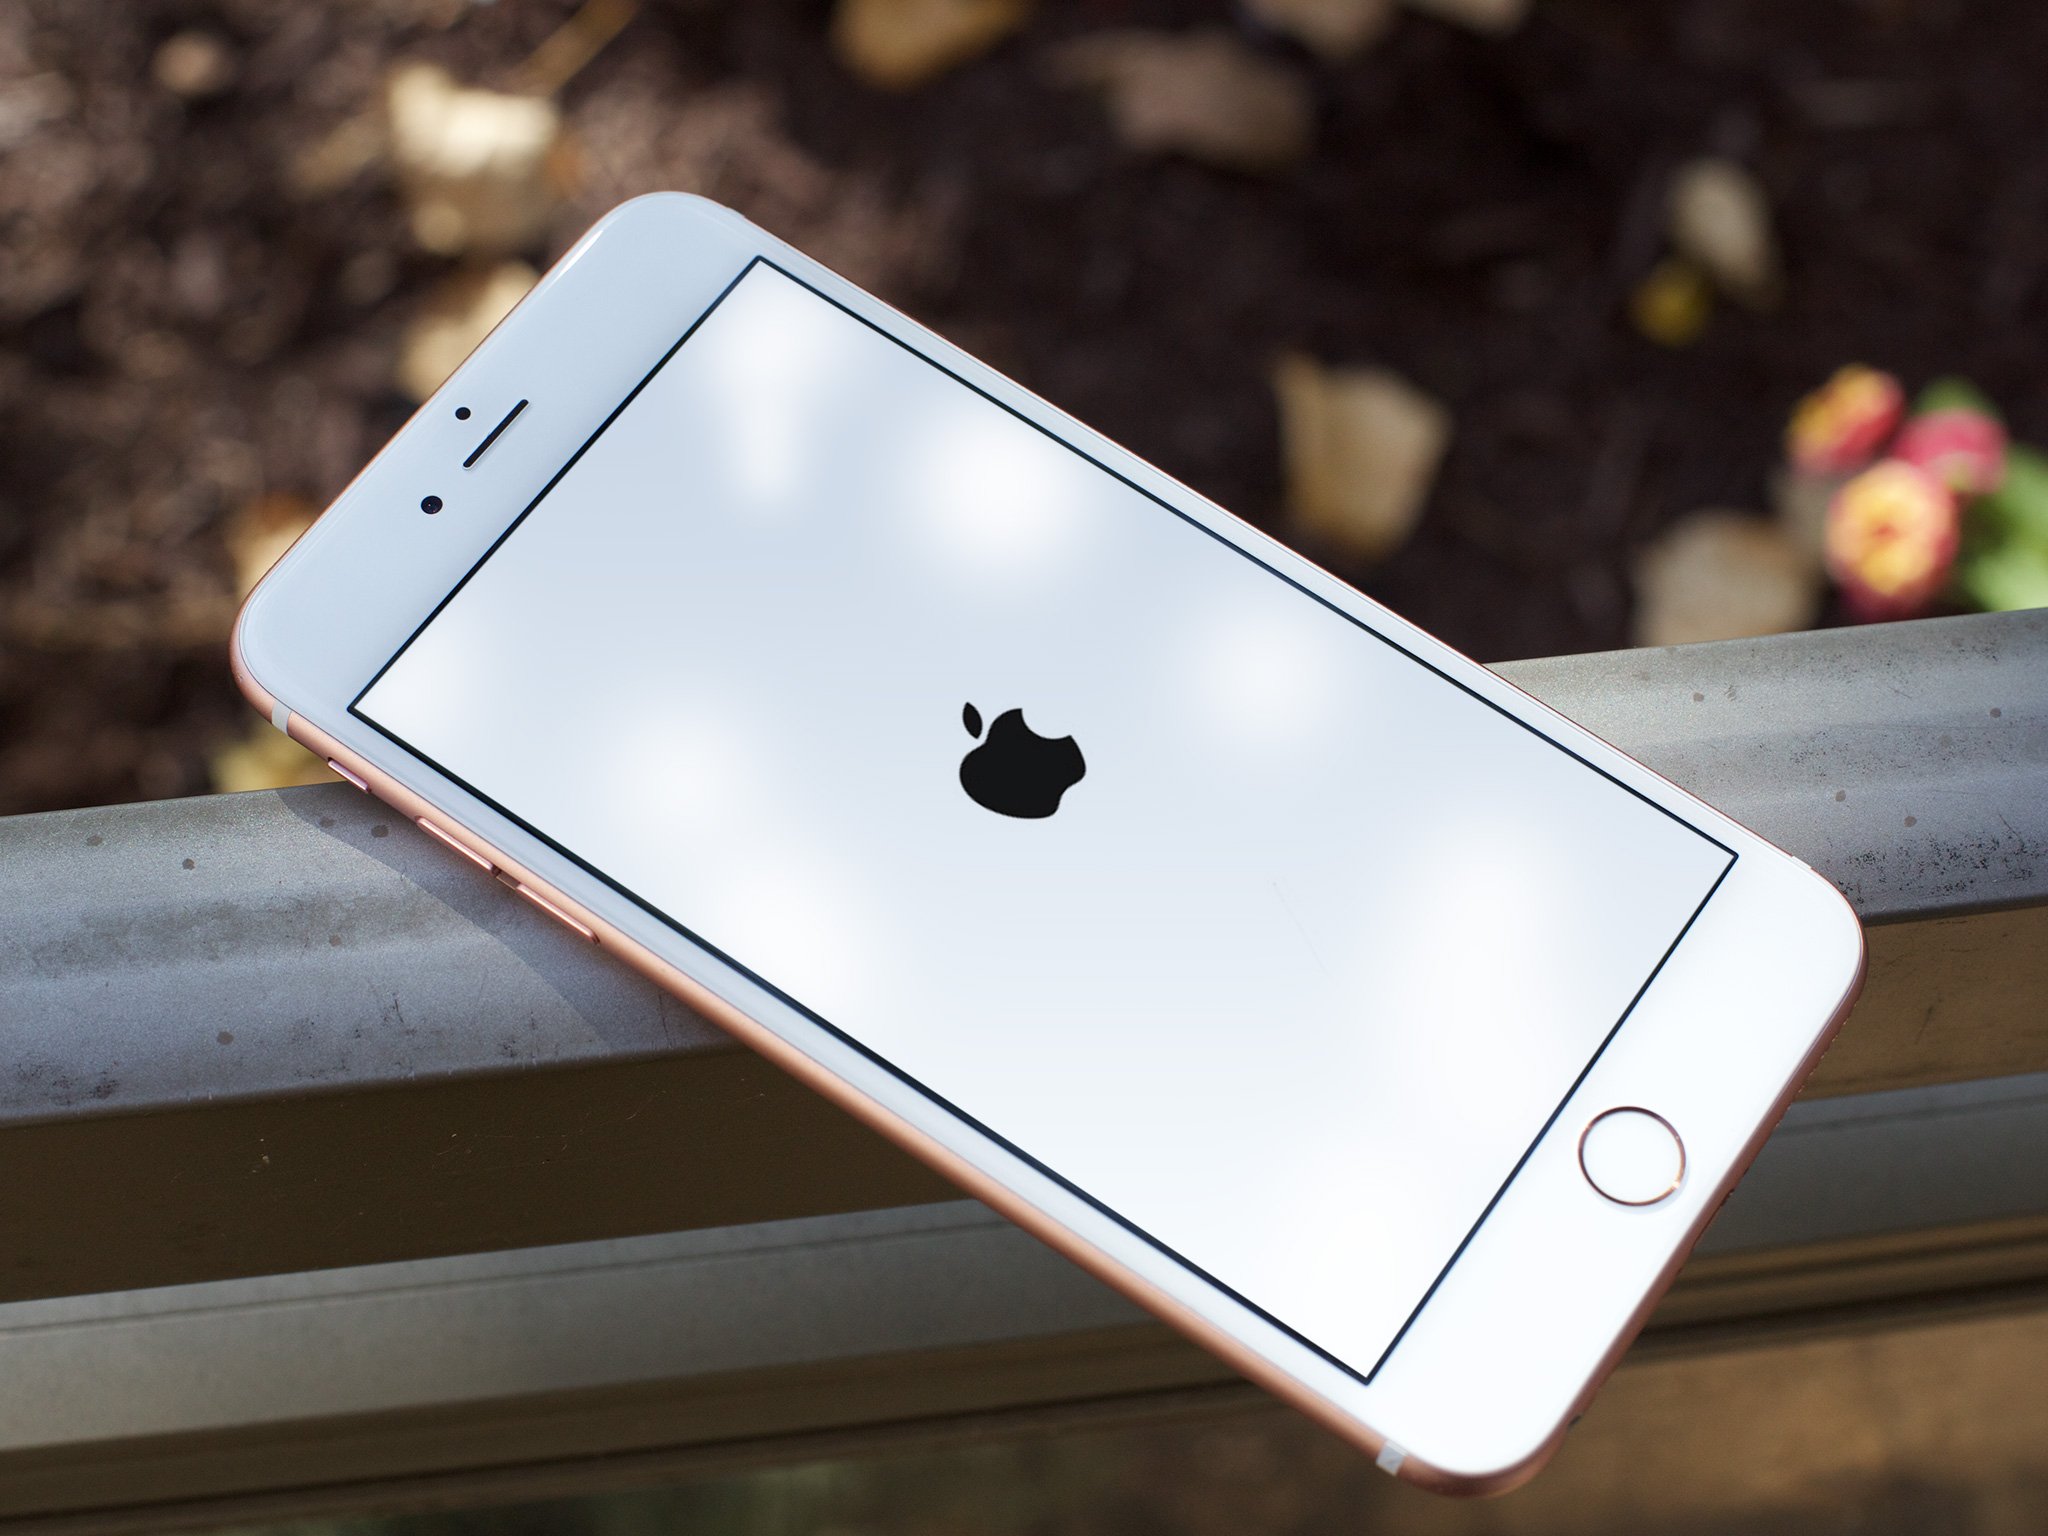 Newly-uncovered date glitch could brick your iPhone when you reboot